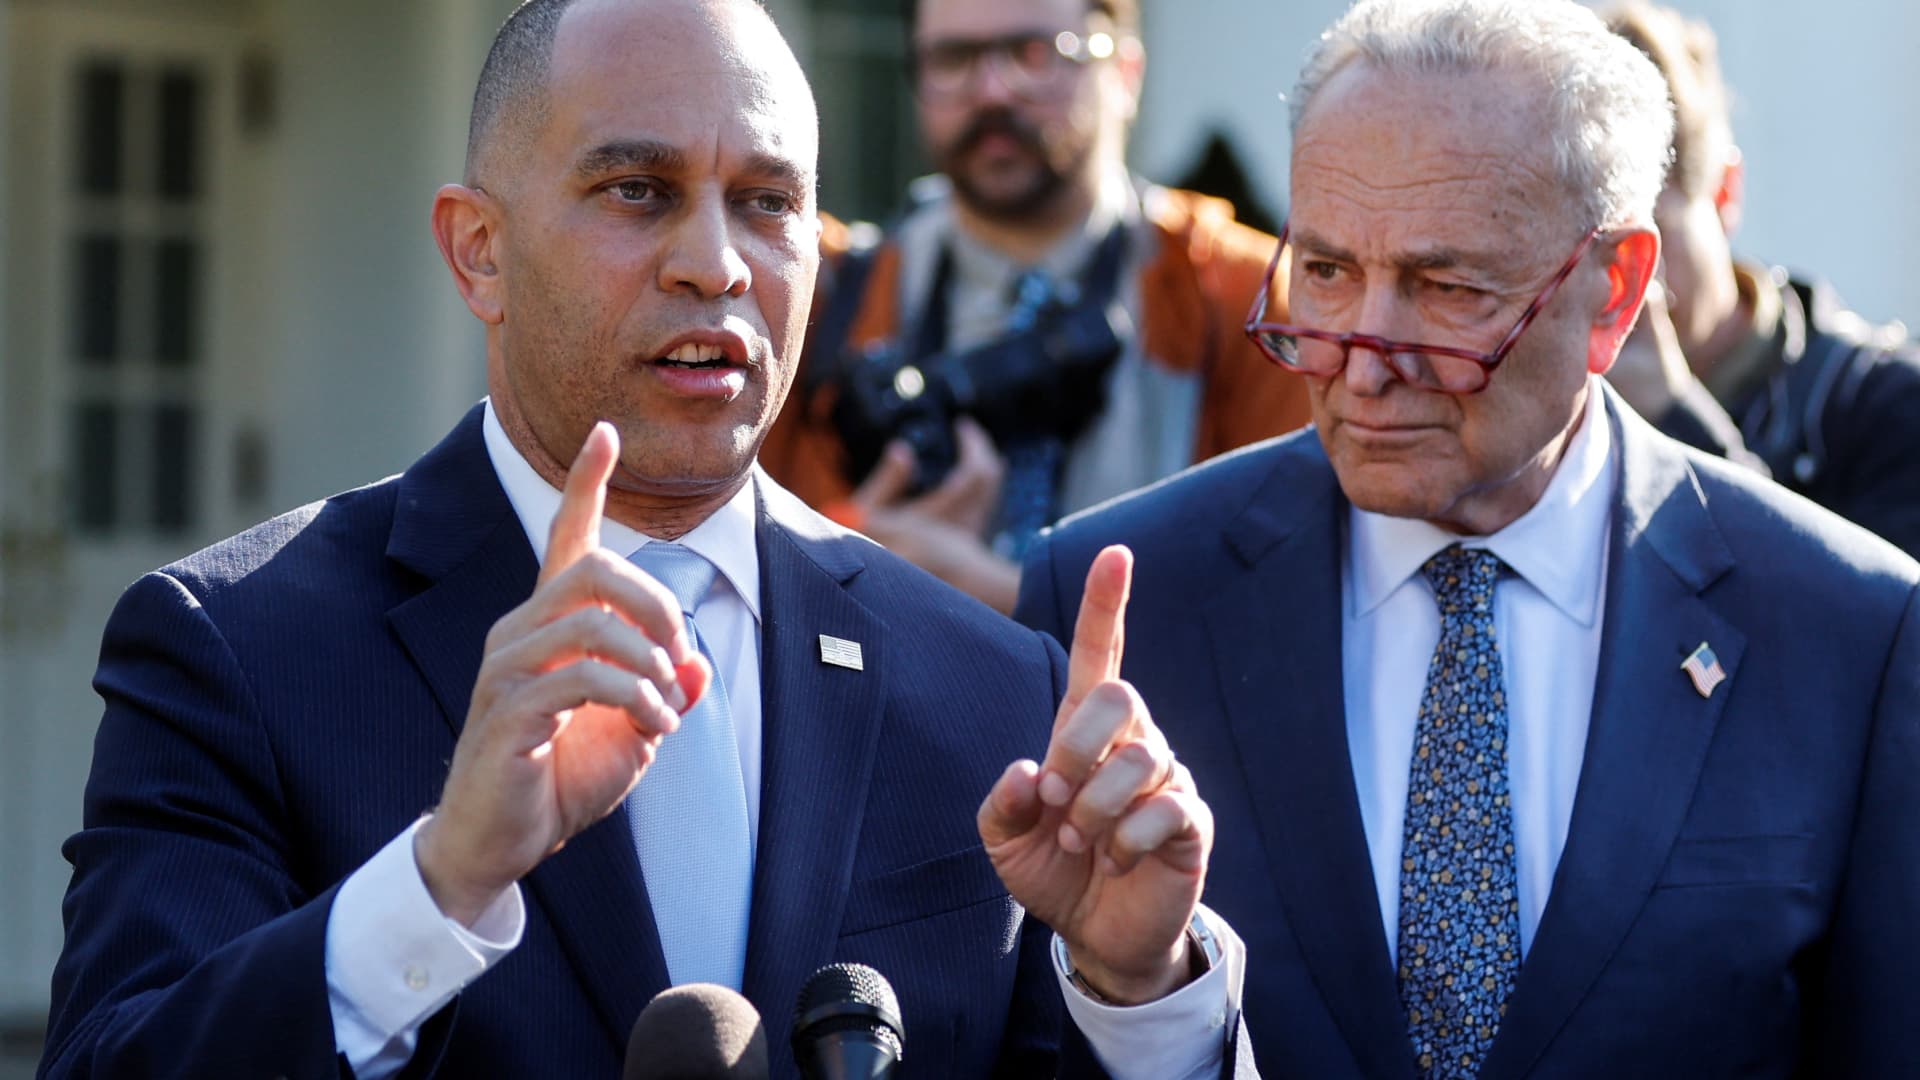 U.S. House Democratic Leader Hakeem Jeffries (D-NY) and Senate Majority Leader Chuck Schumer (D-NY) talk to reporters following debt limit talks with U.S. President Joe Biden and Congressional leaders at the White House in Washington, May 9, 2023.